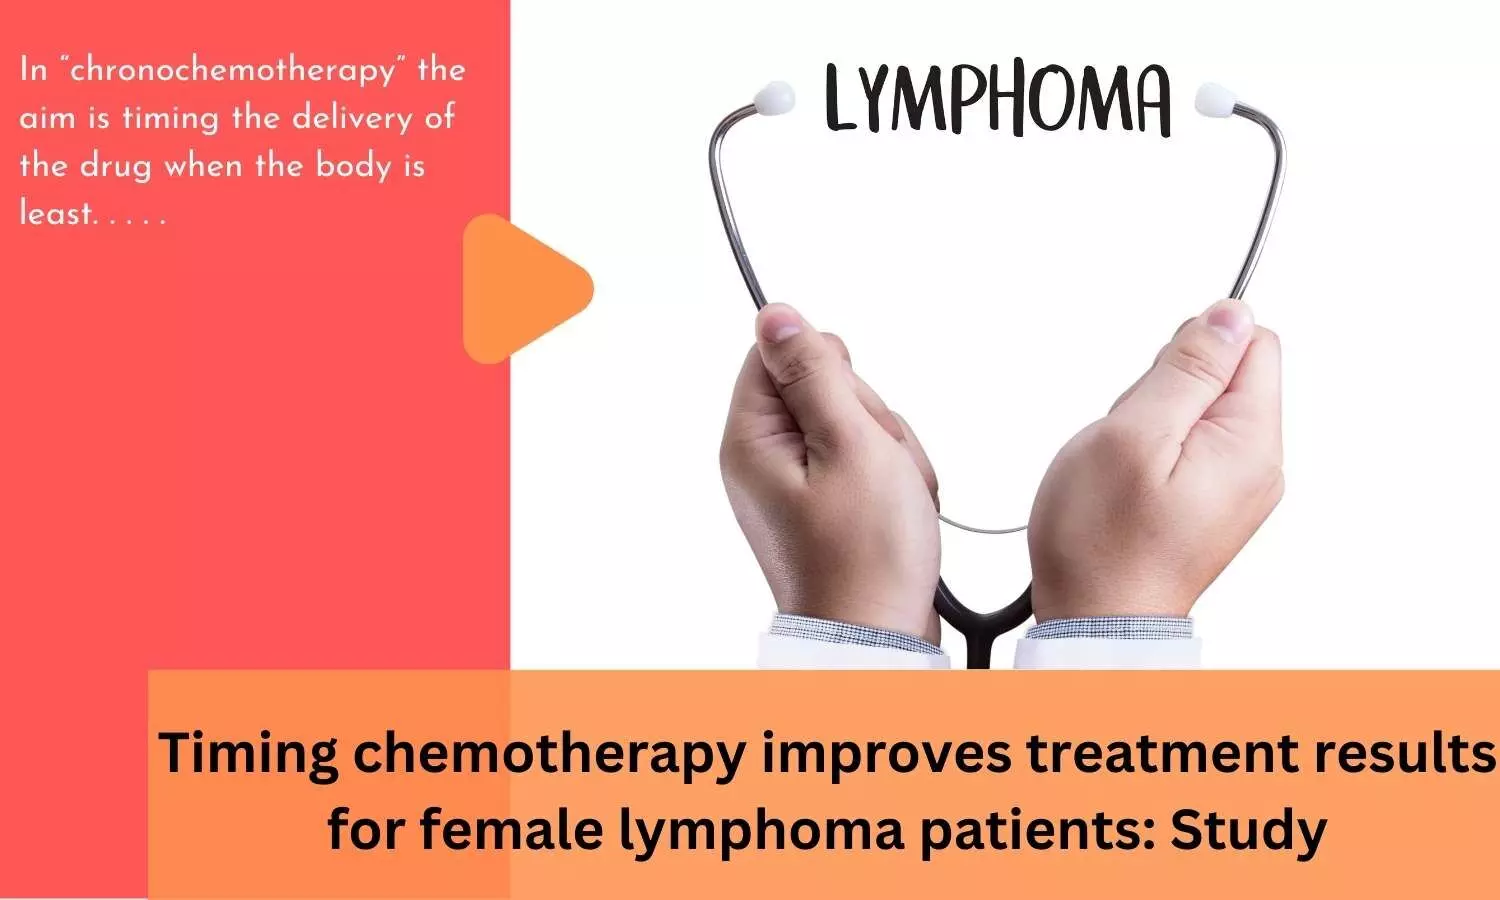 Timing chemotherapy improves treatment results for female lymphoma patients: Study